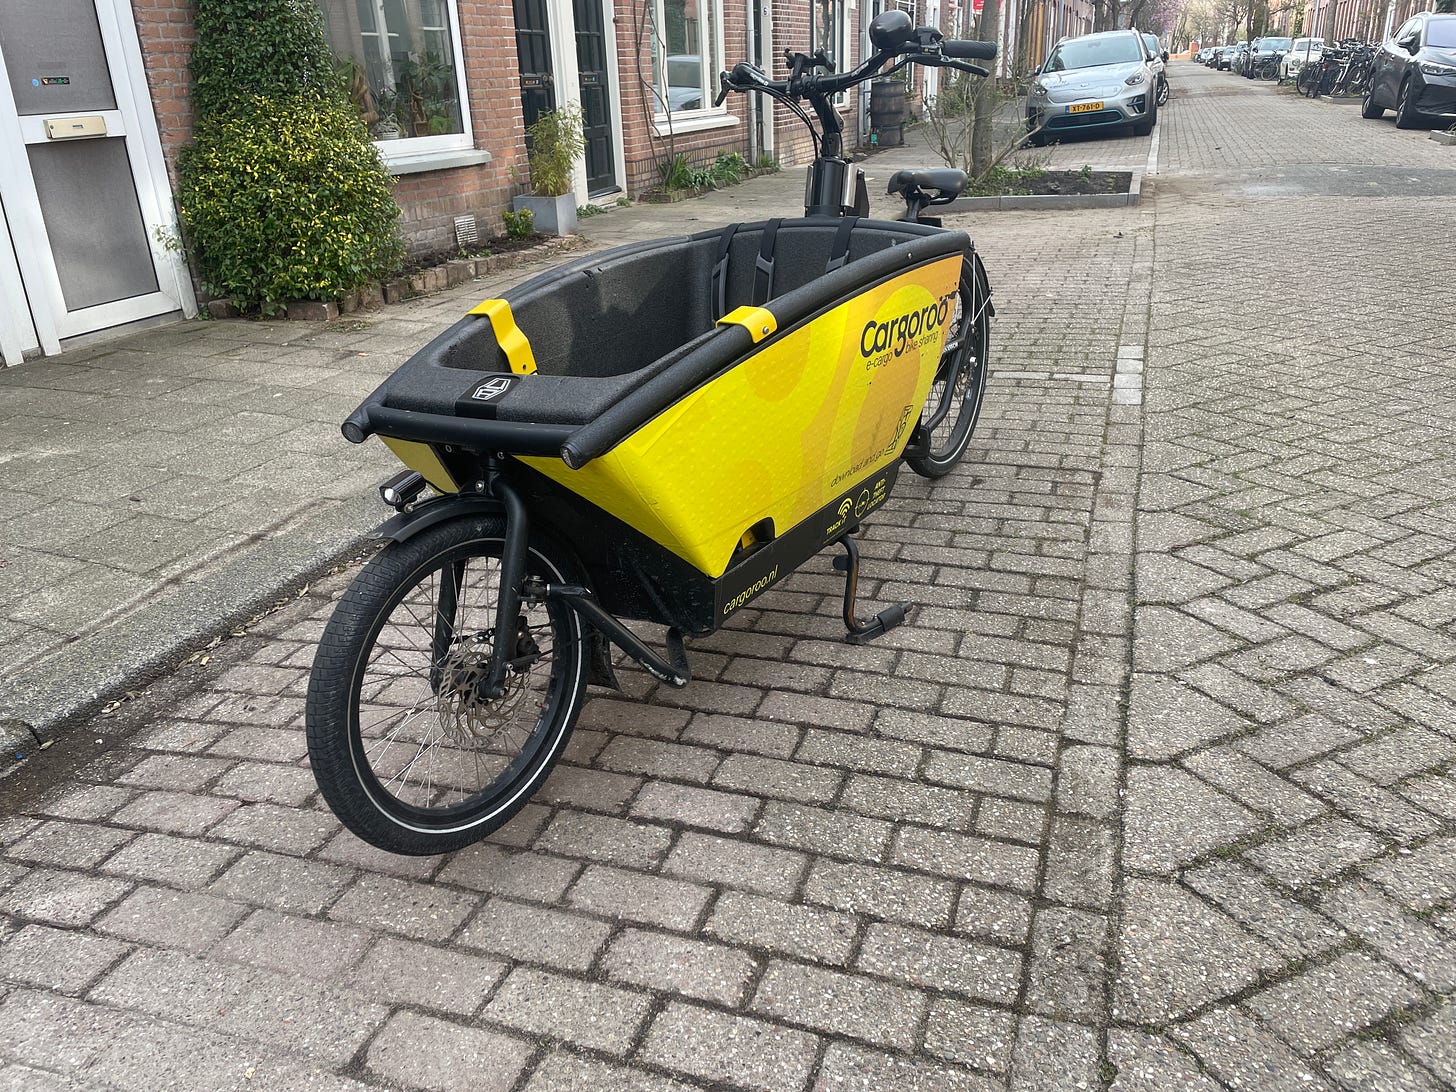 A yellow Cargoroo cargobike is parked in a car parking bay on a residential dutch street